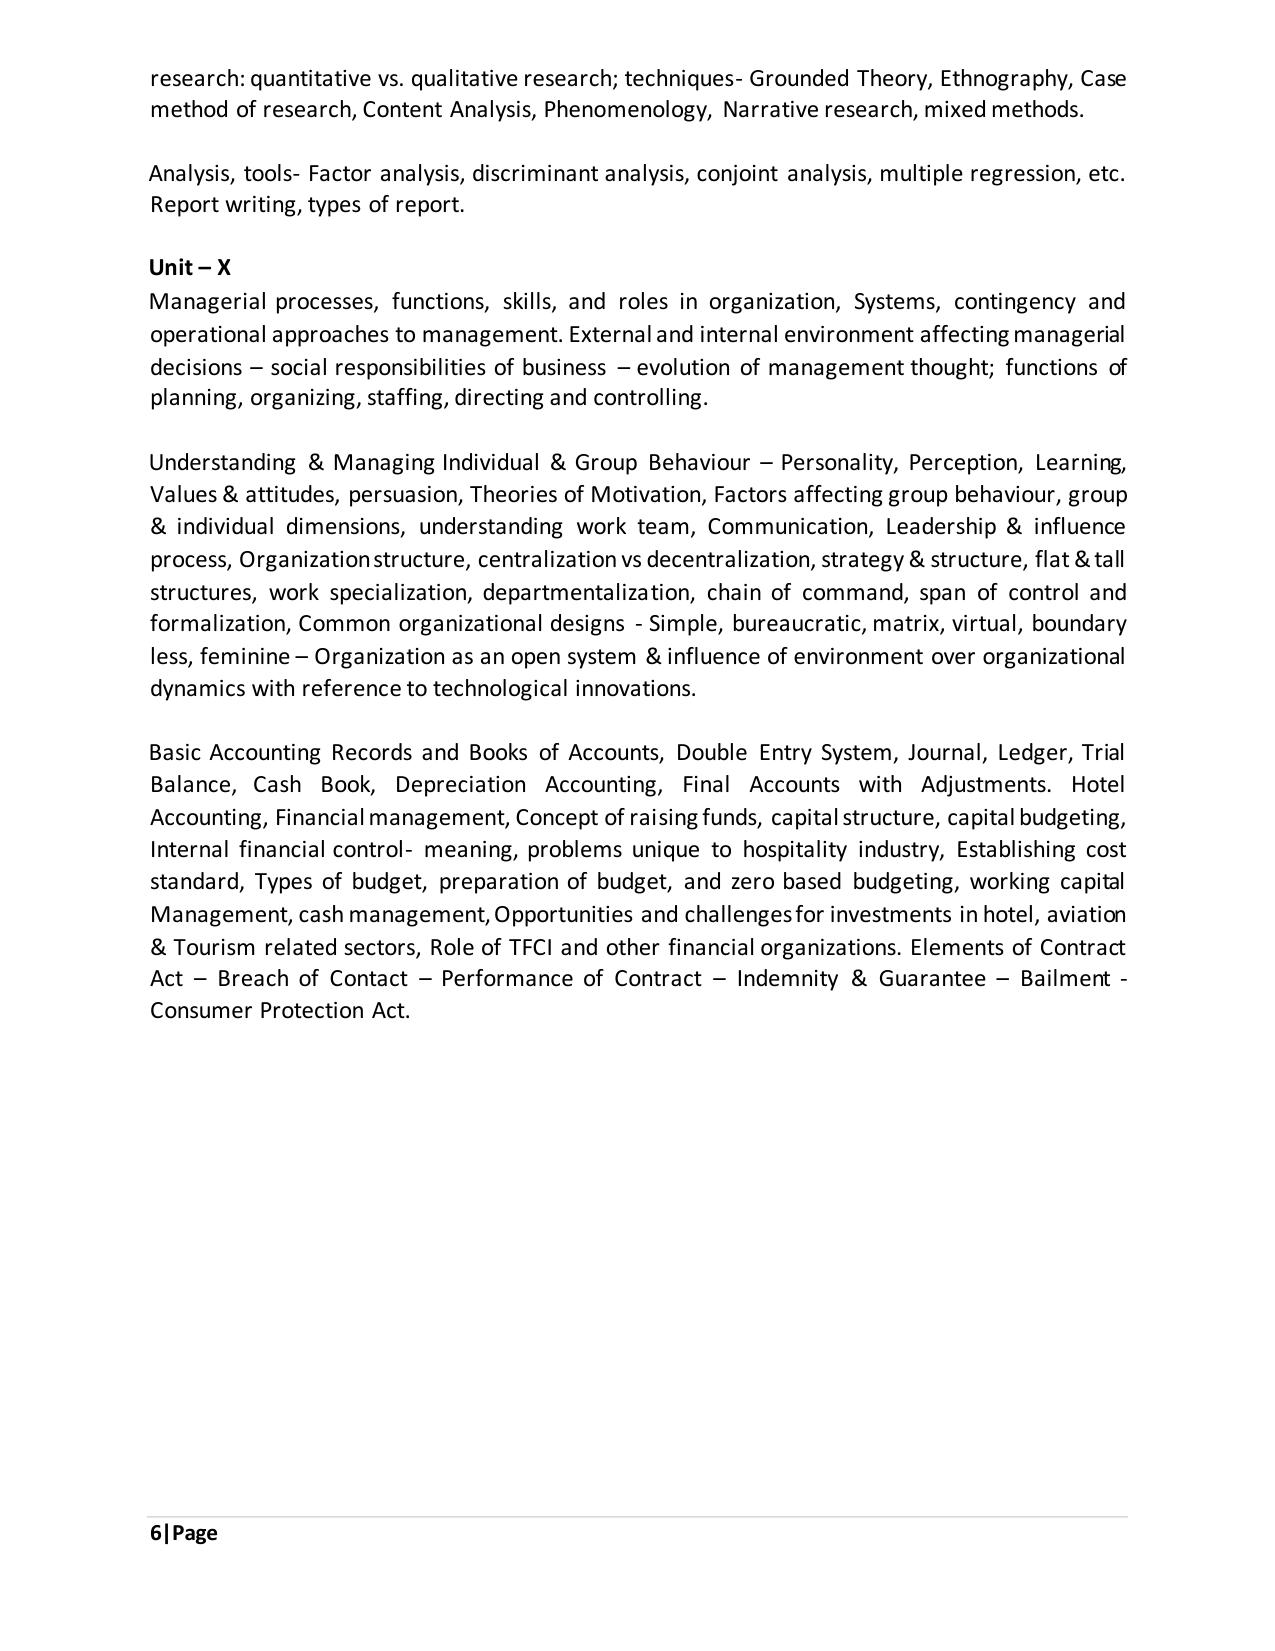 TNSET Syllabus - Tourism Administration and Management - Page 6